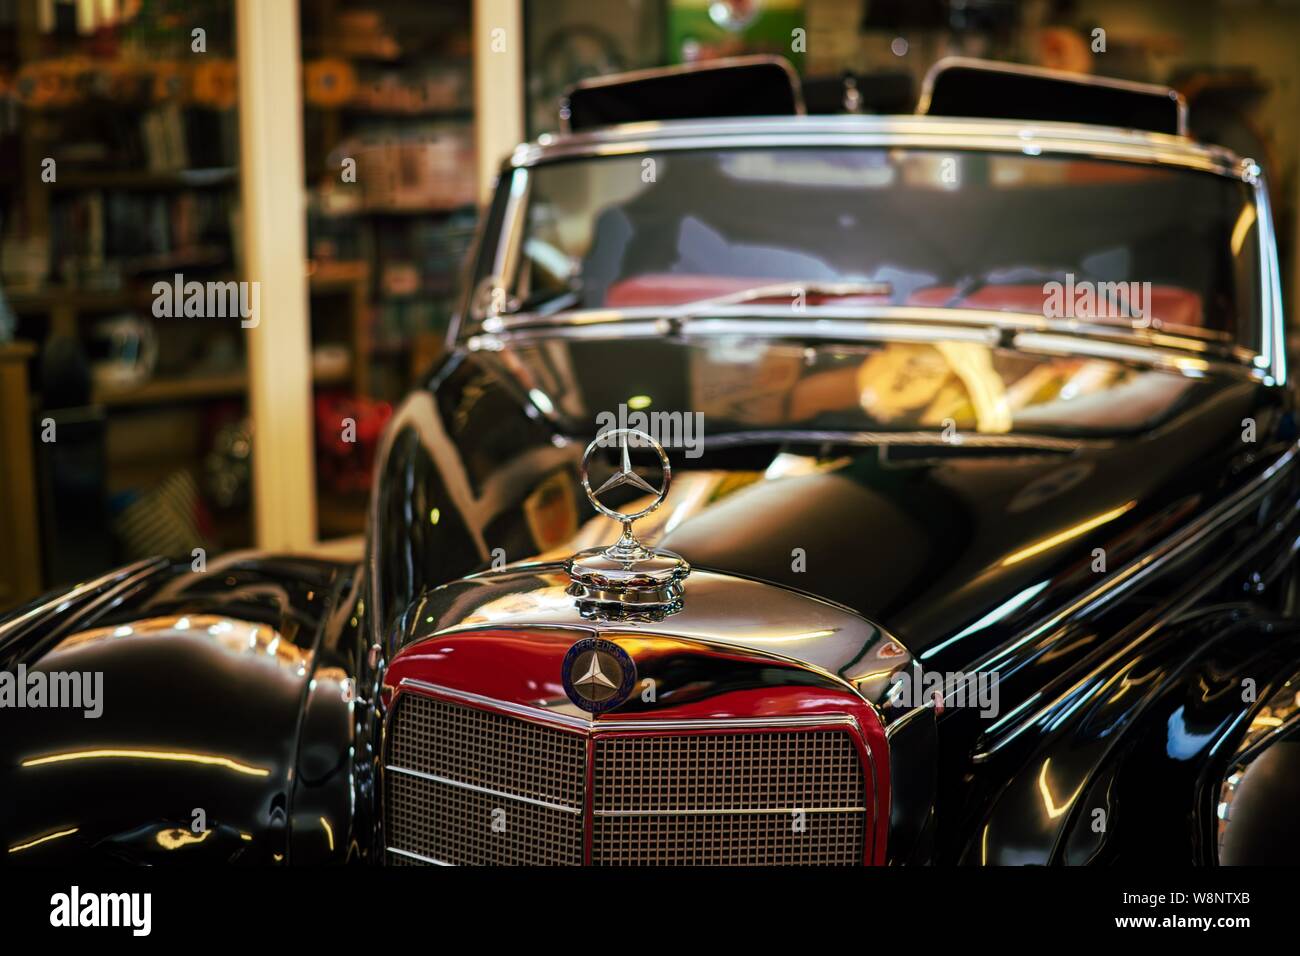 Shiny Black Mercedes Benz in the private car museum at a car show staged by Robert and Tanya Lewis at Old Kiln Farm, Churt, Surrey, UK Stock Photo